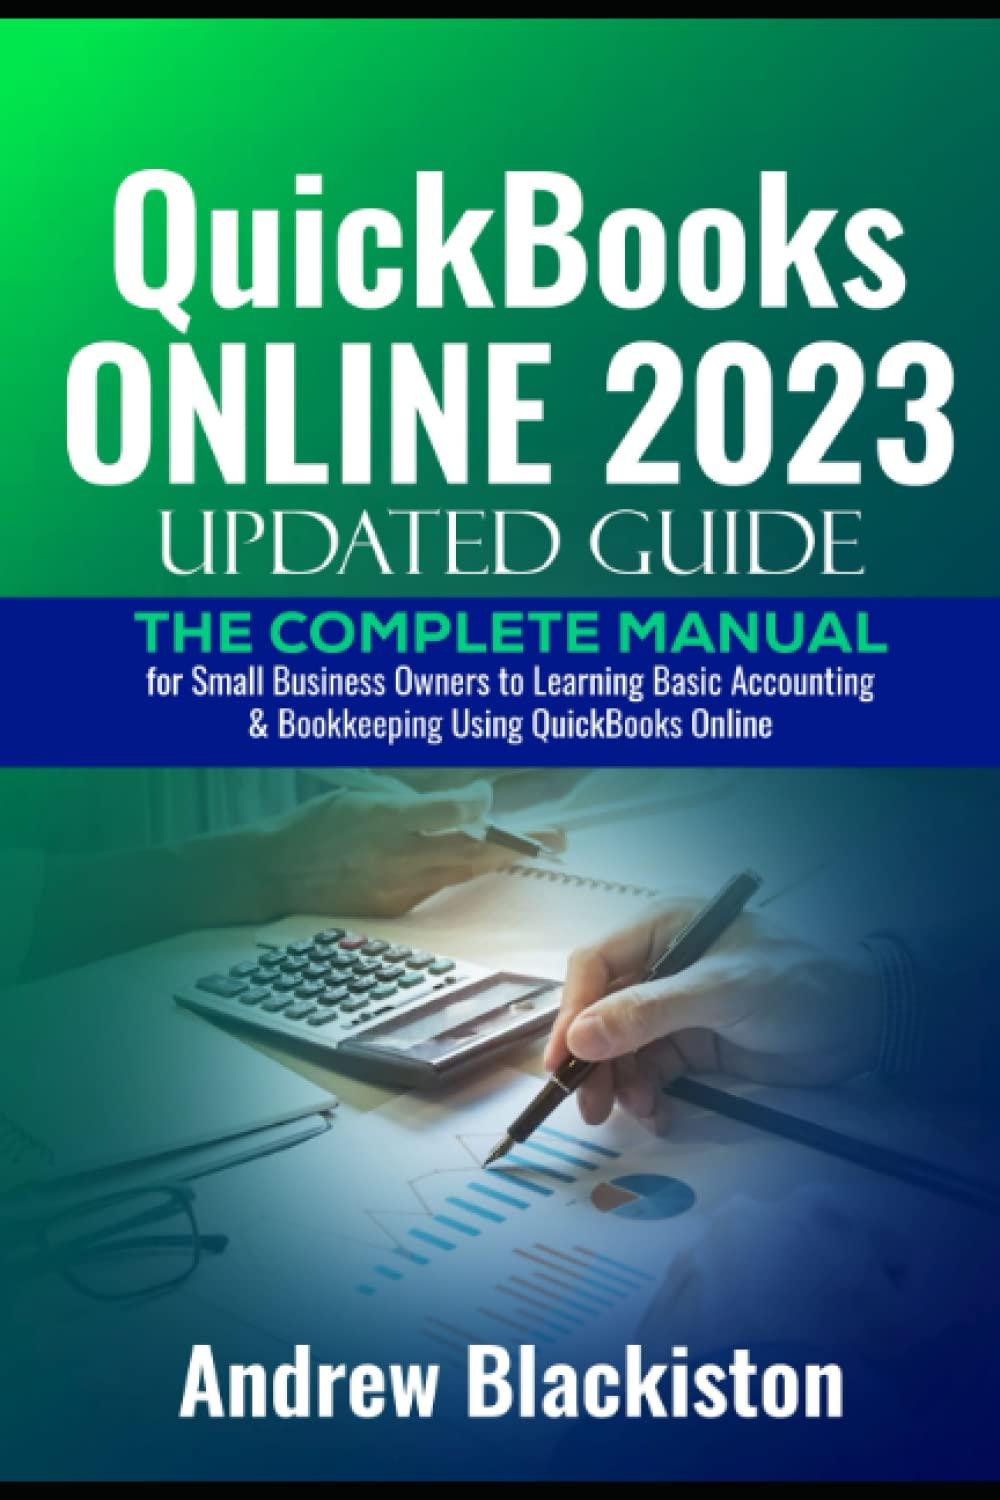 quickbooks online 2023 updated guide 1st edition andrew blackiston 8375383712, 979-8375383712